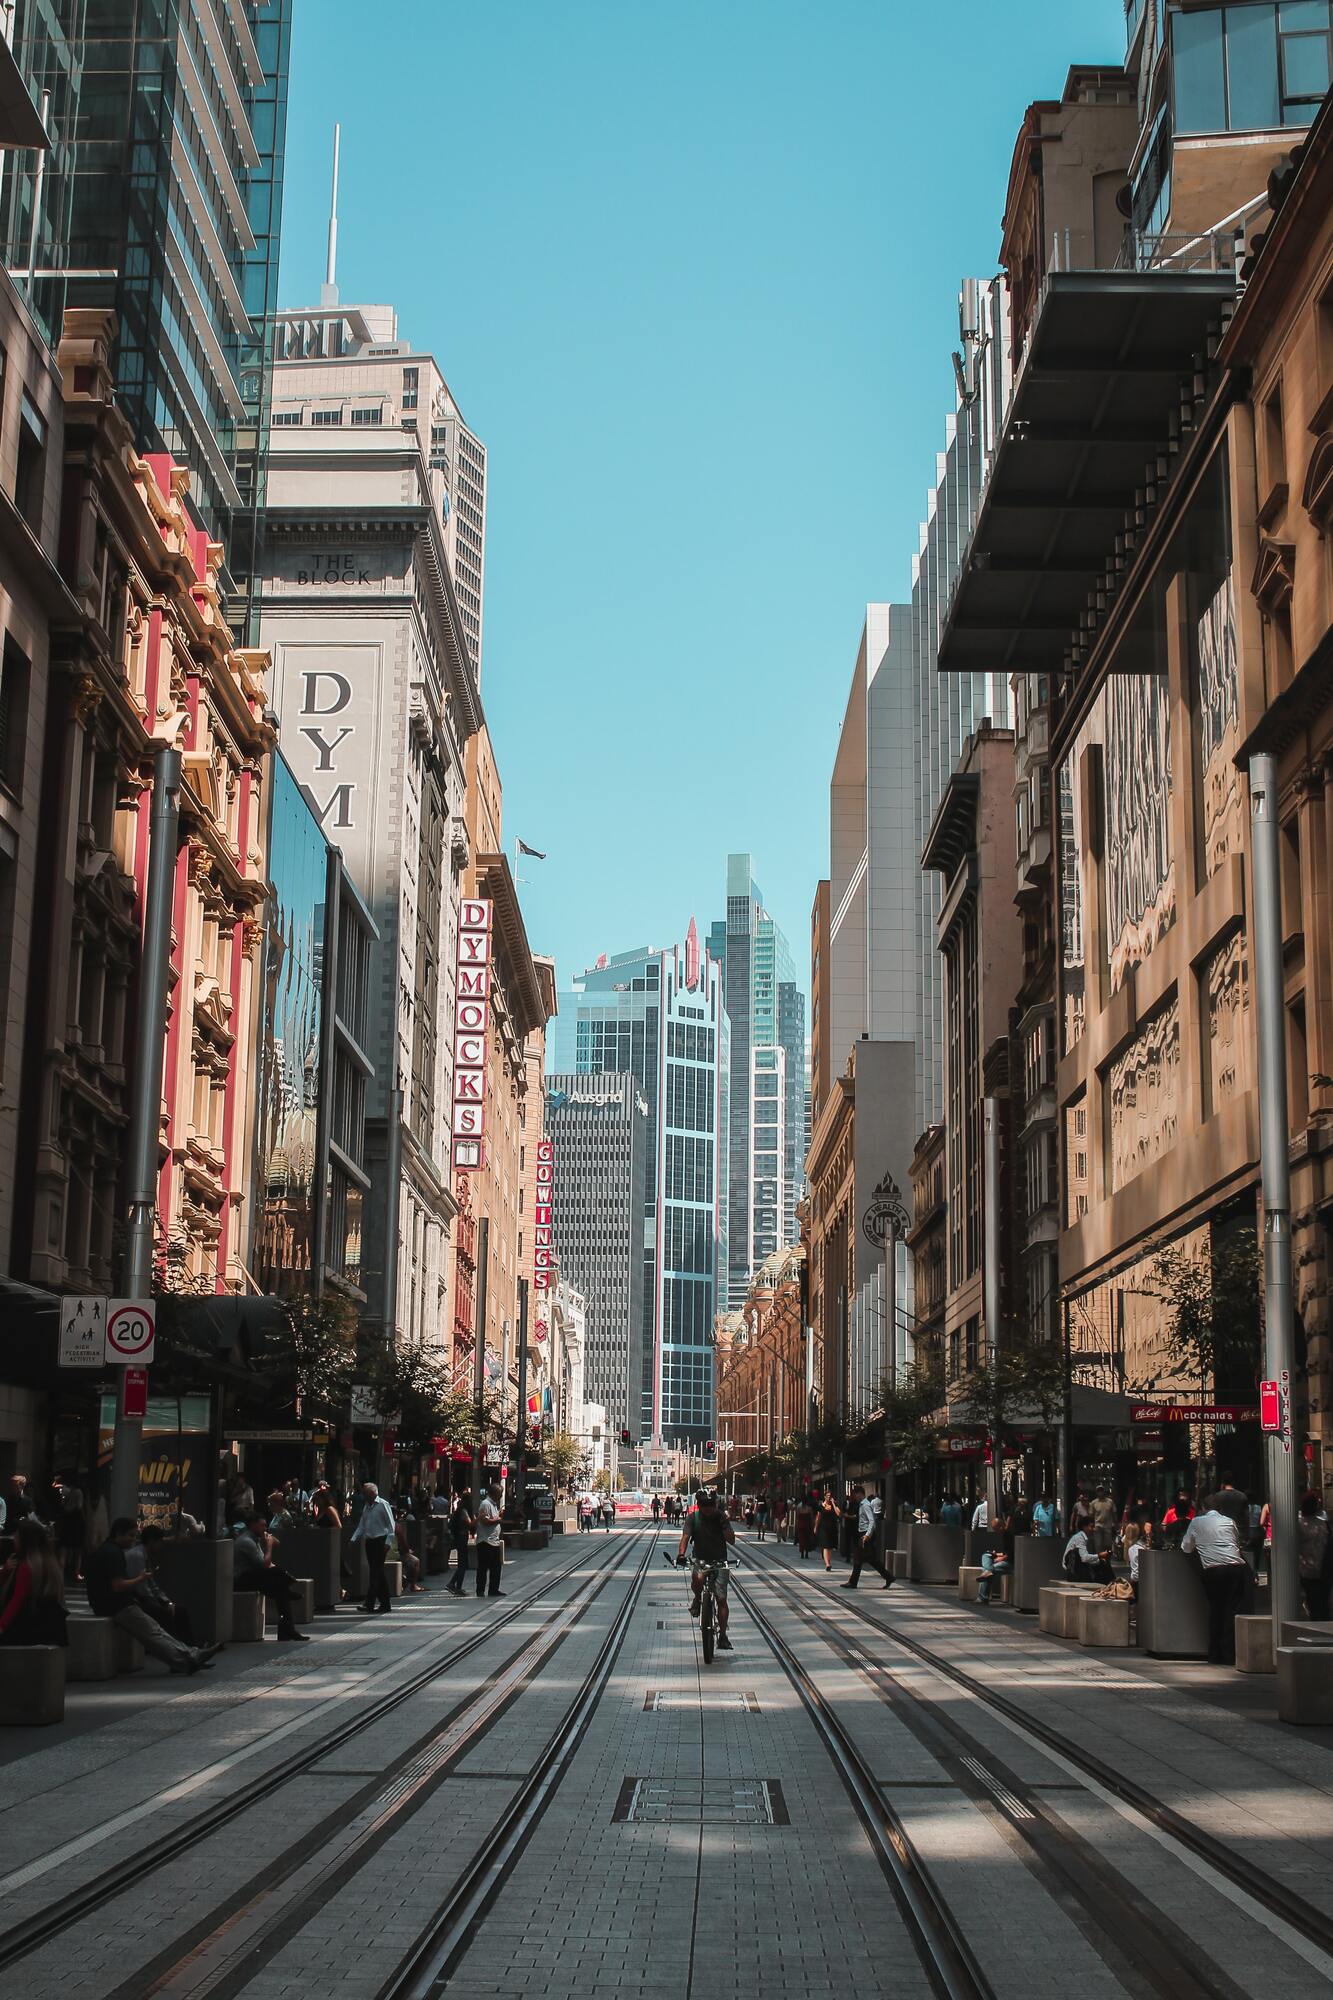 <p>Holidays are also about shopping, and that's why George Street is a popular destination. Located in the center of Sydney, it has a tram and a light underground to make it more interesting for tourists.</p> <p>Photo: Laura Cross / Unsplash</p>